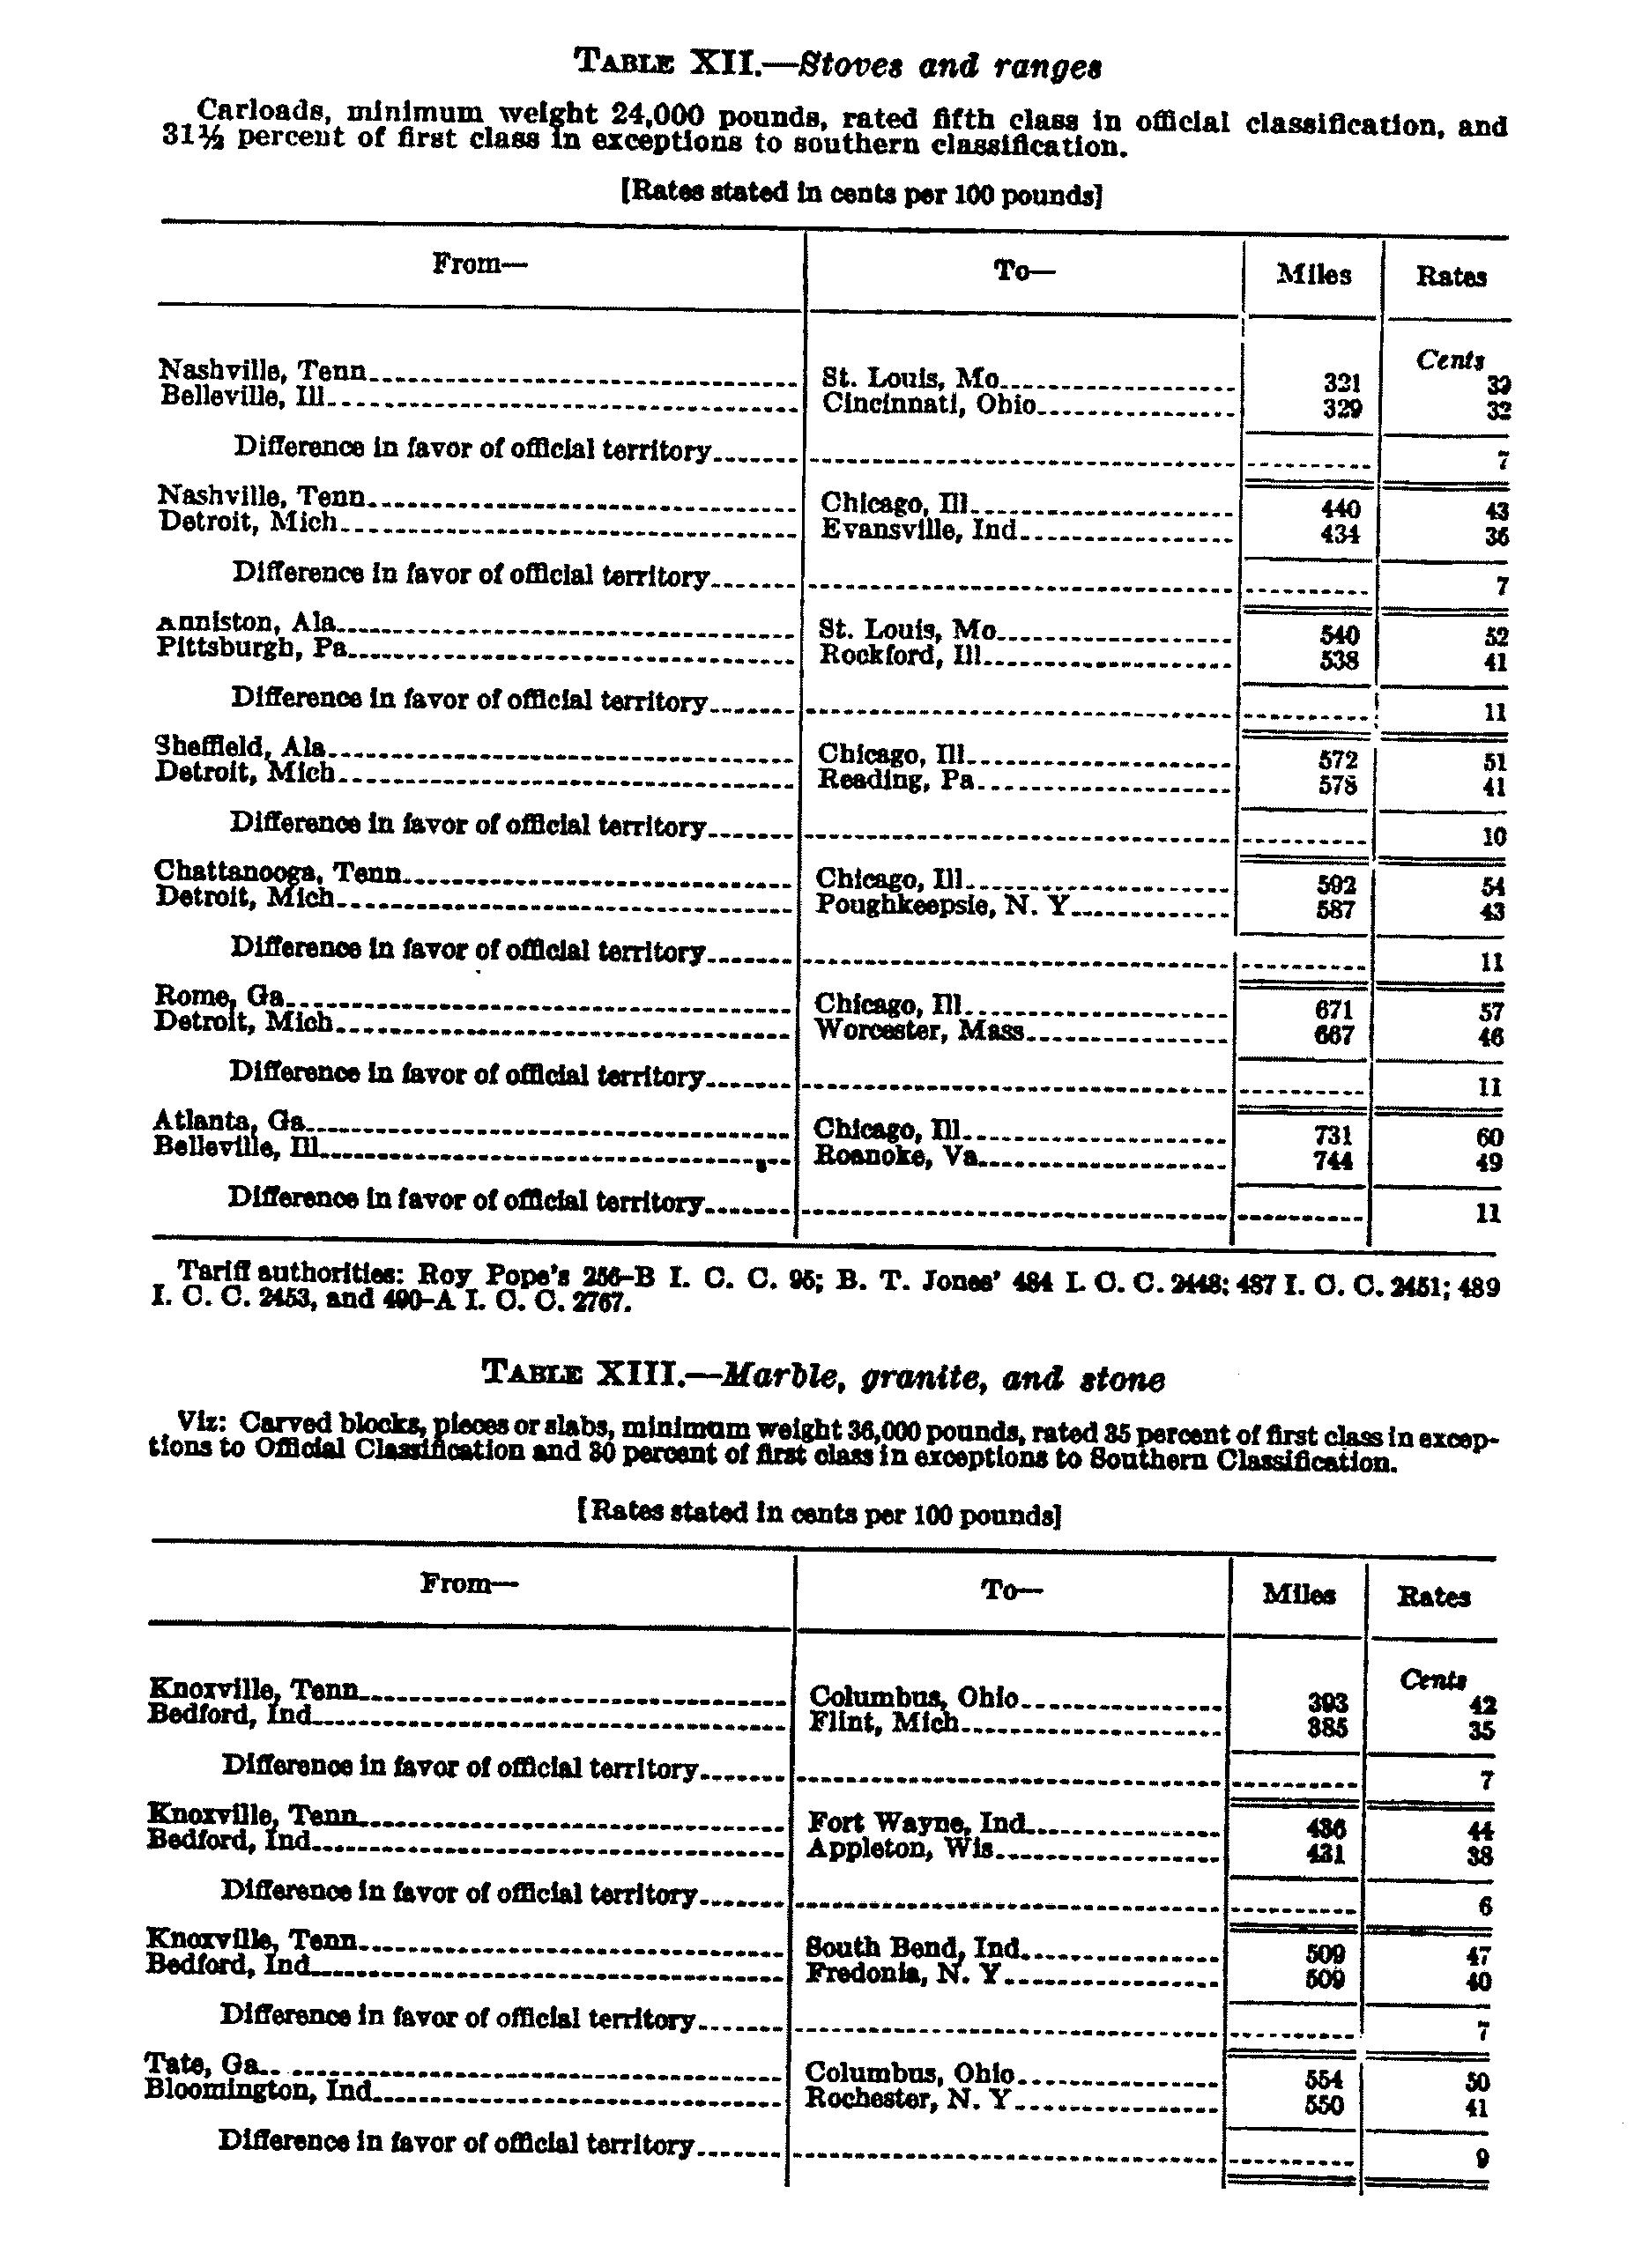 Page 1046 Tables XII and XIII